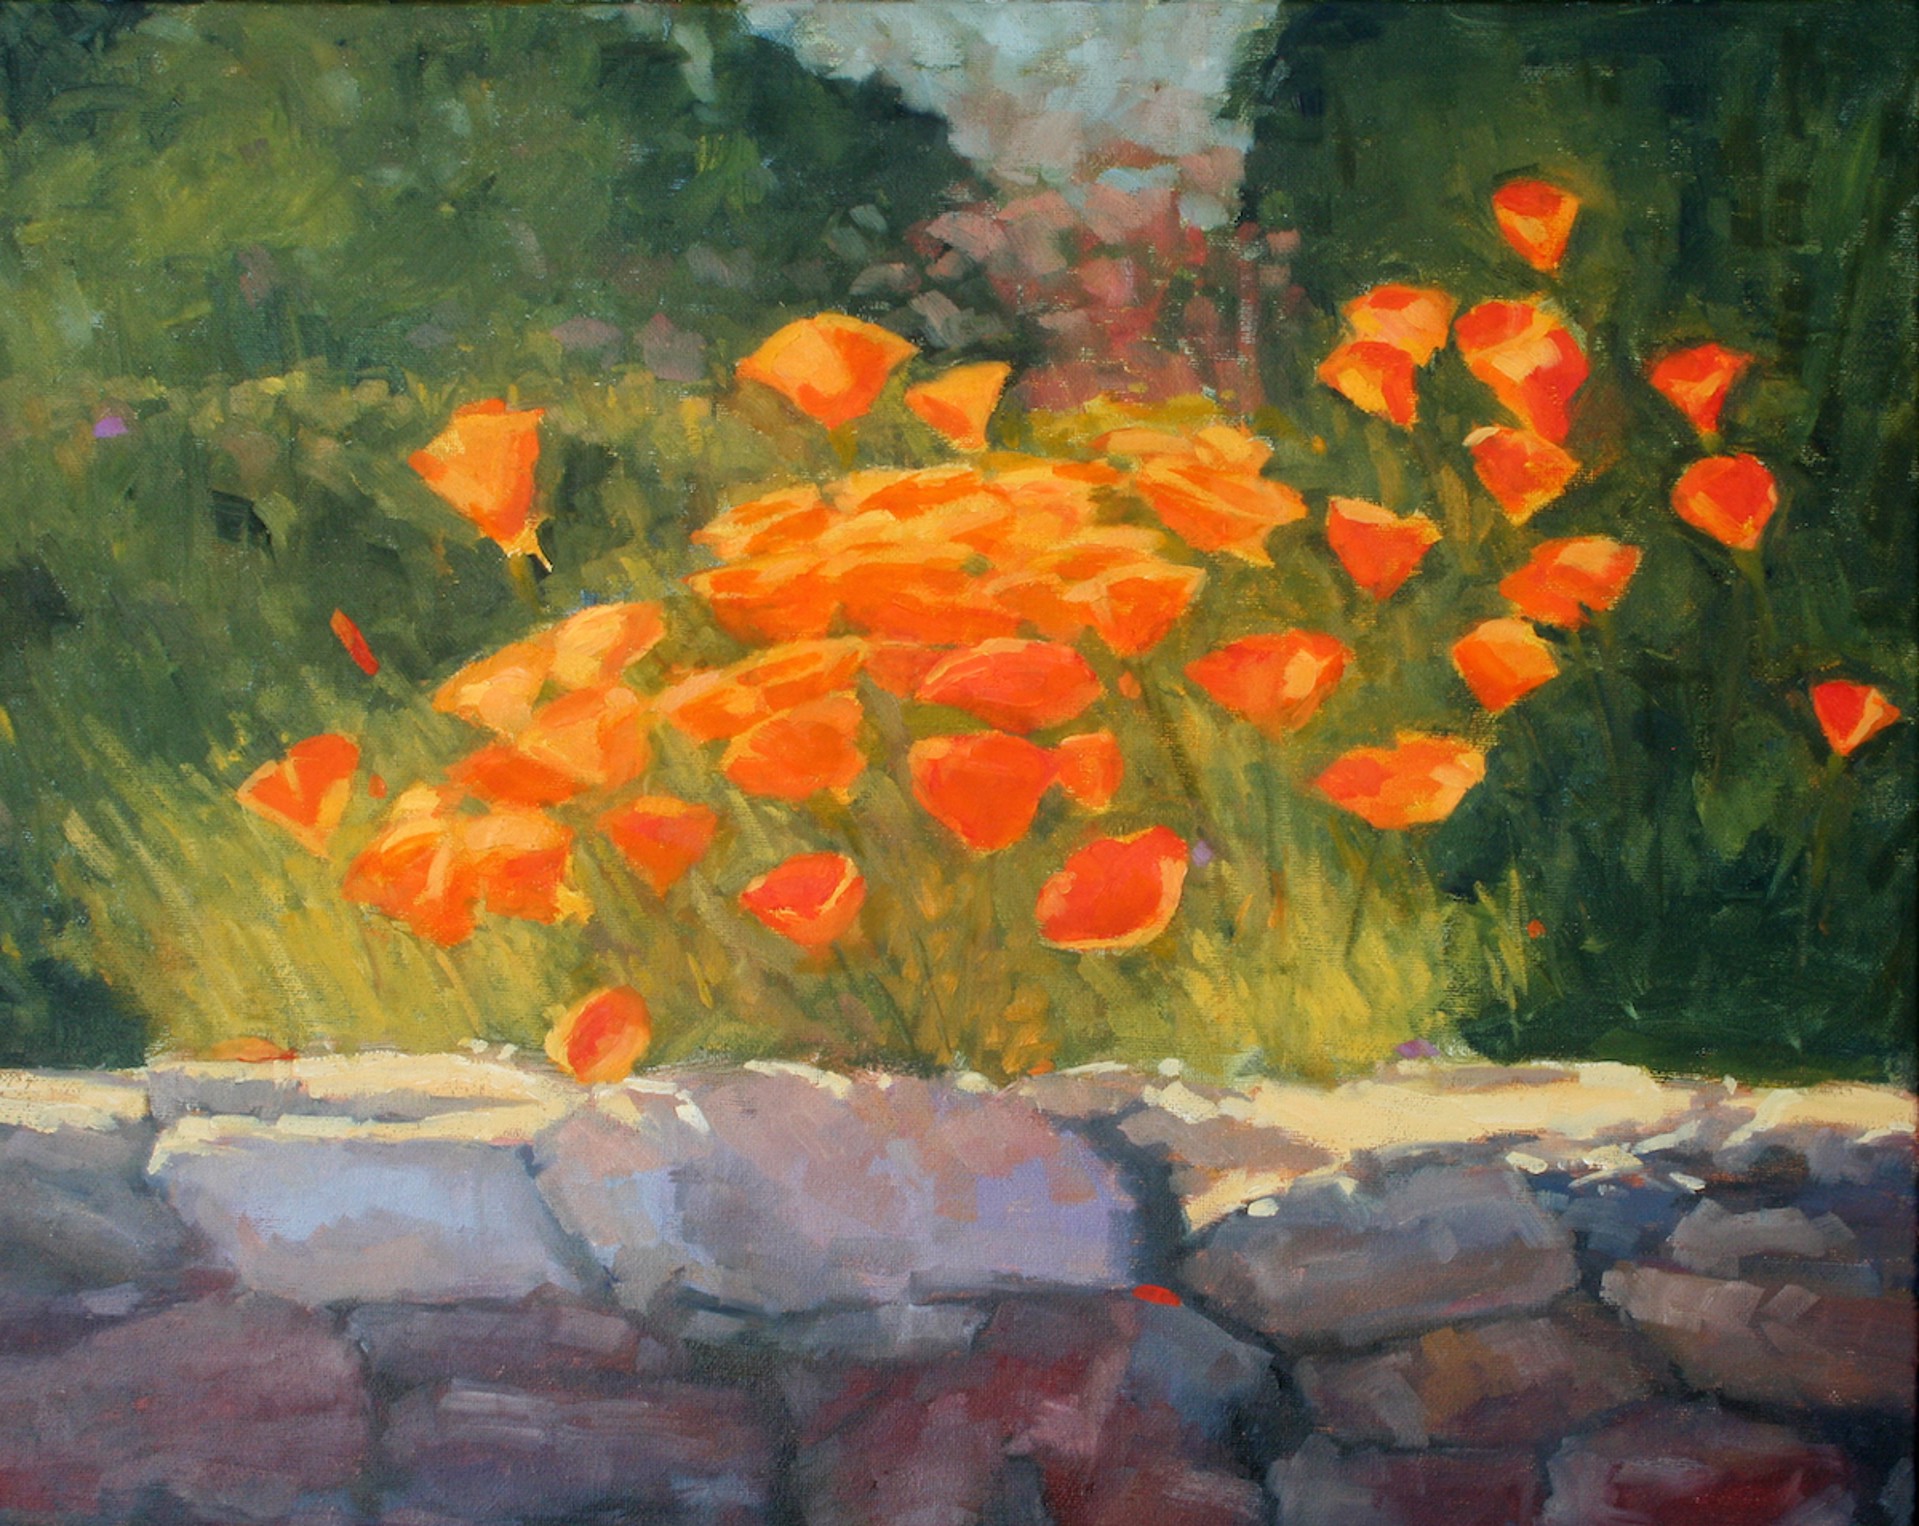 Old Wall, Young Poppies by Stan Robbins